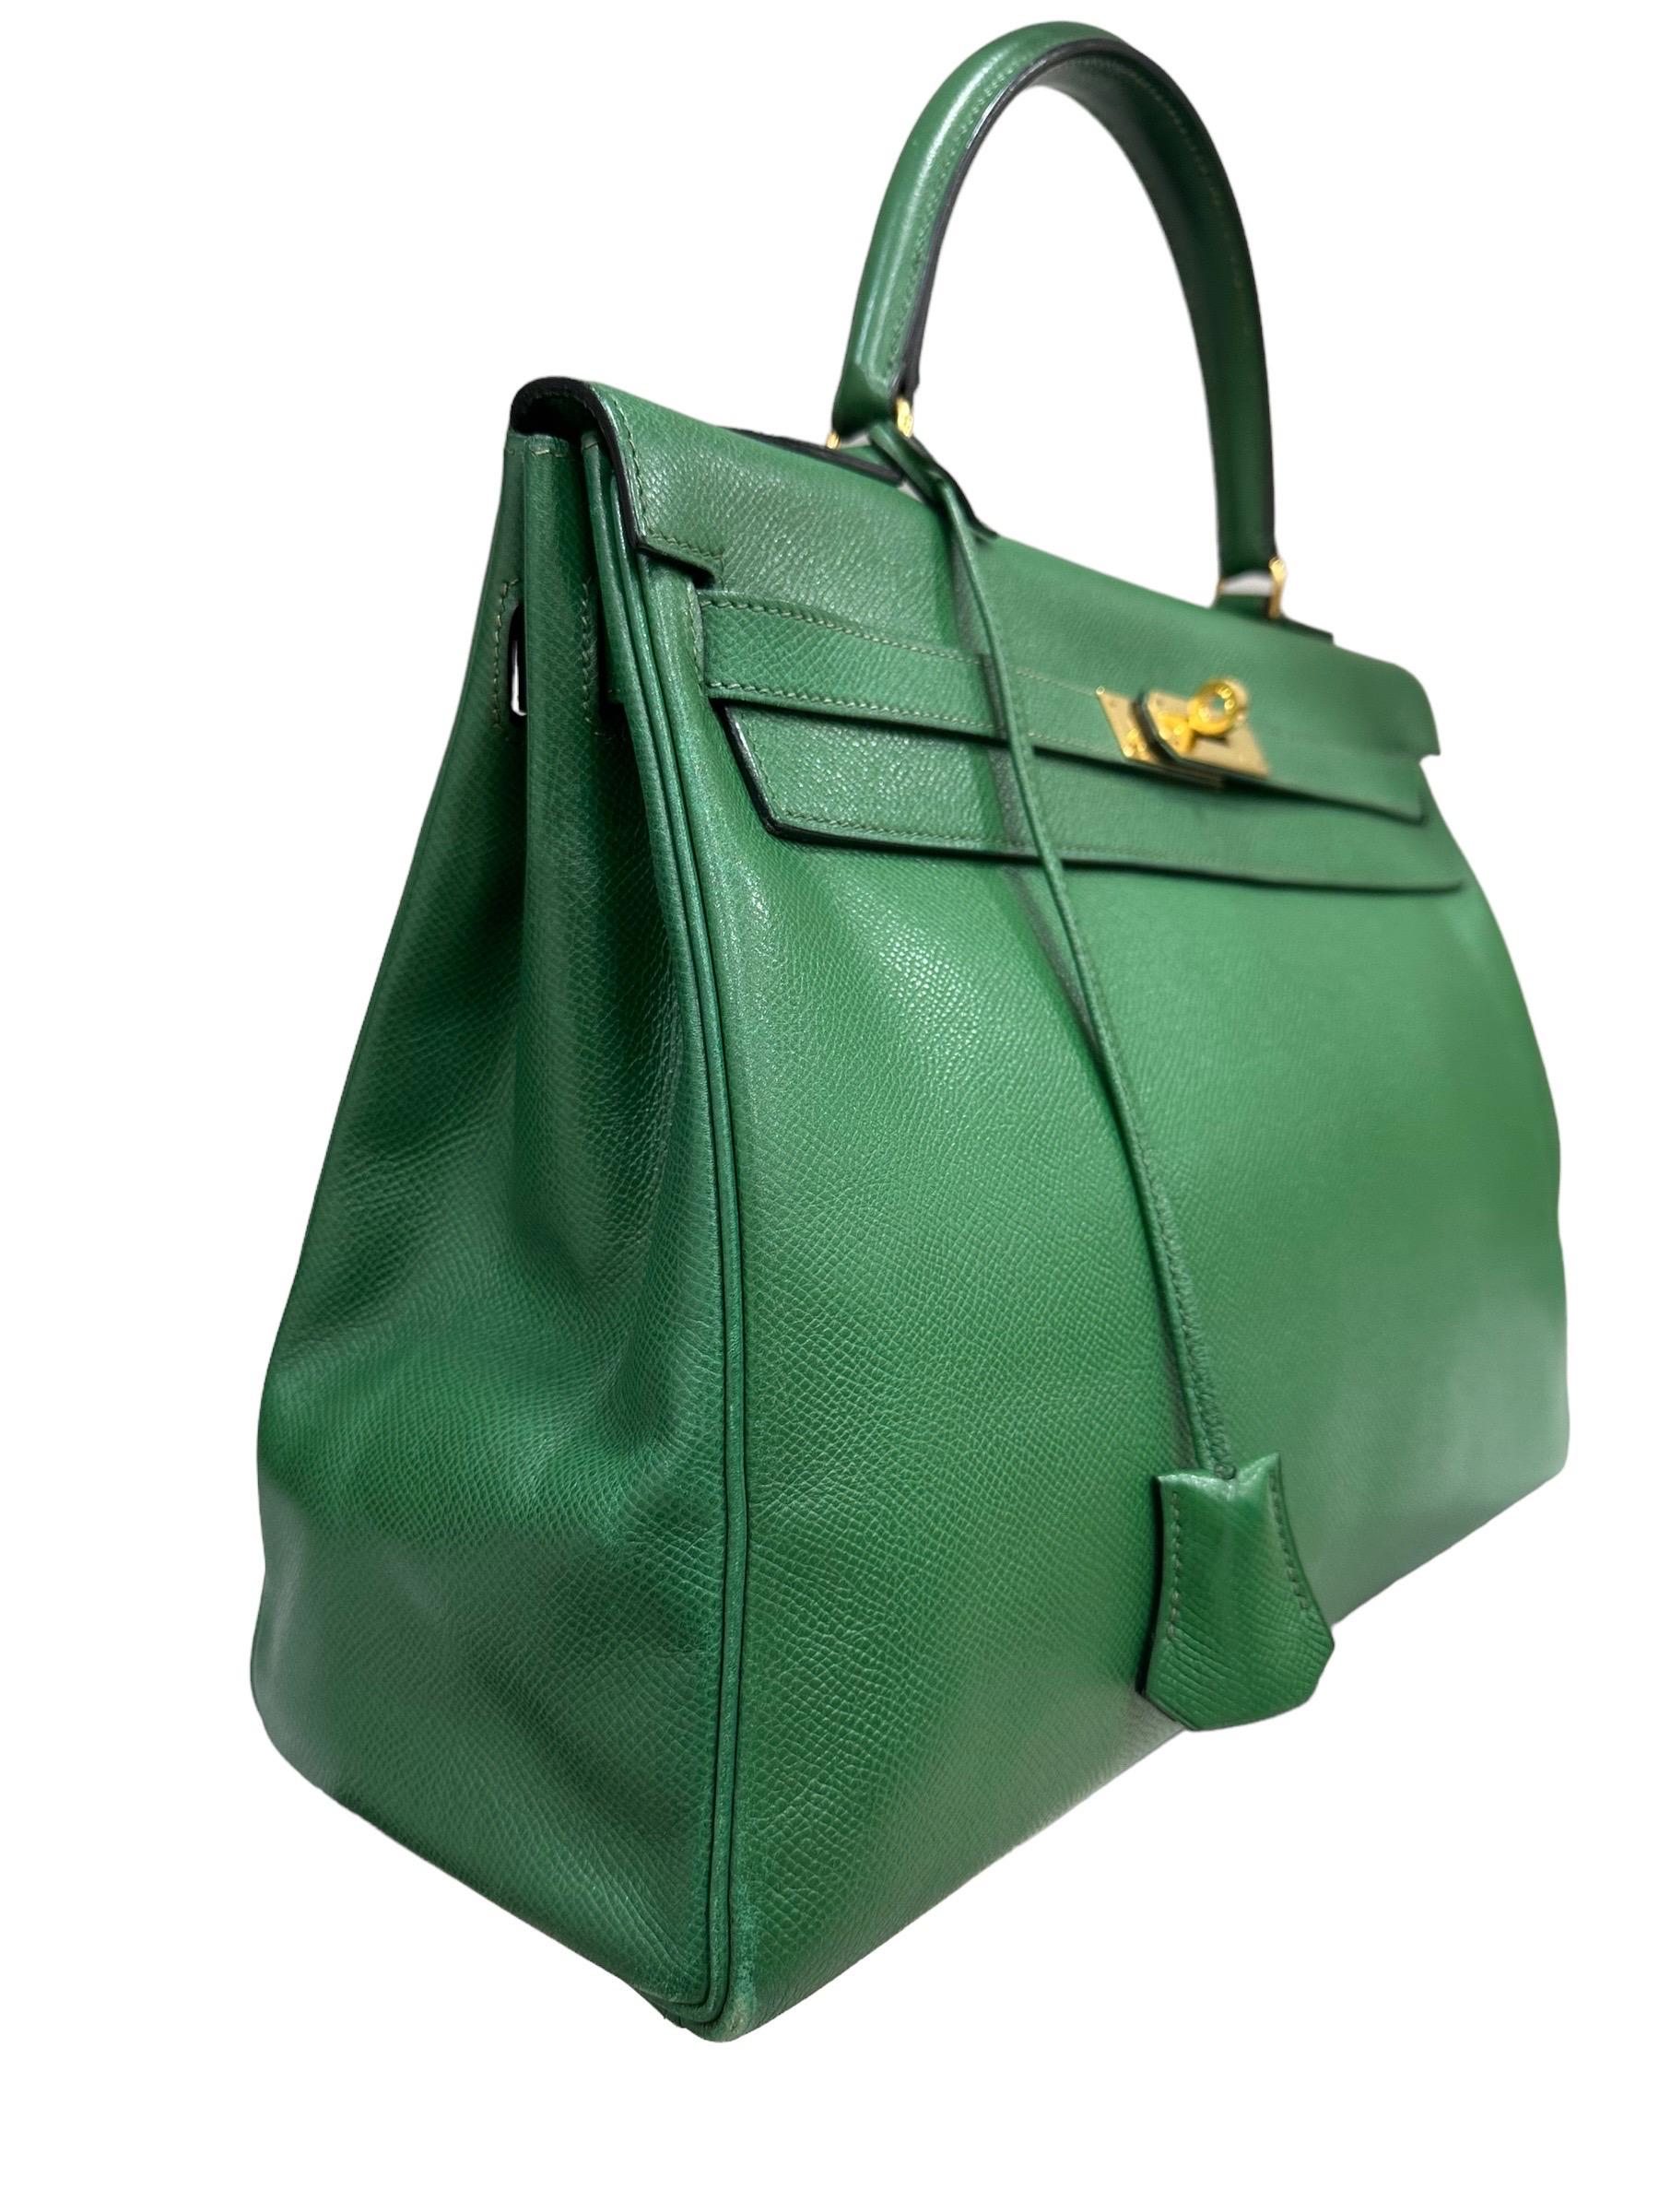 Signed bag Hermès, Kelly model, size 35, made of epsom leather vert color bengale with golden hardware. Equipped with a central leather handle for a hand flow, and a removable shoulder strap in thin leather. Equipped with a flap with interlocking